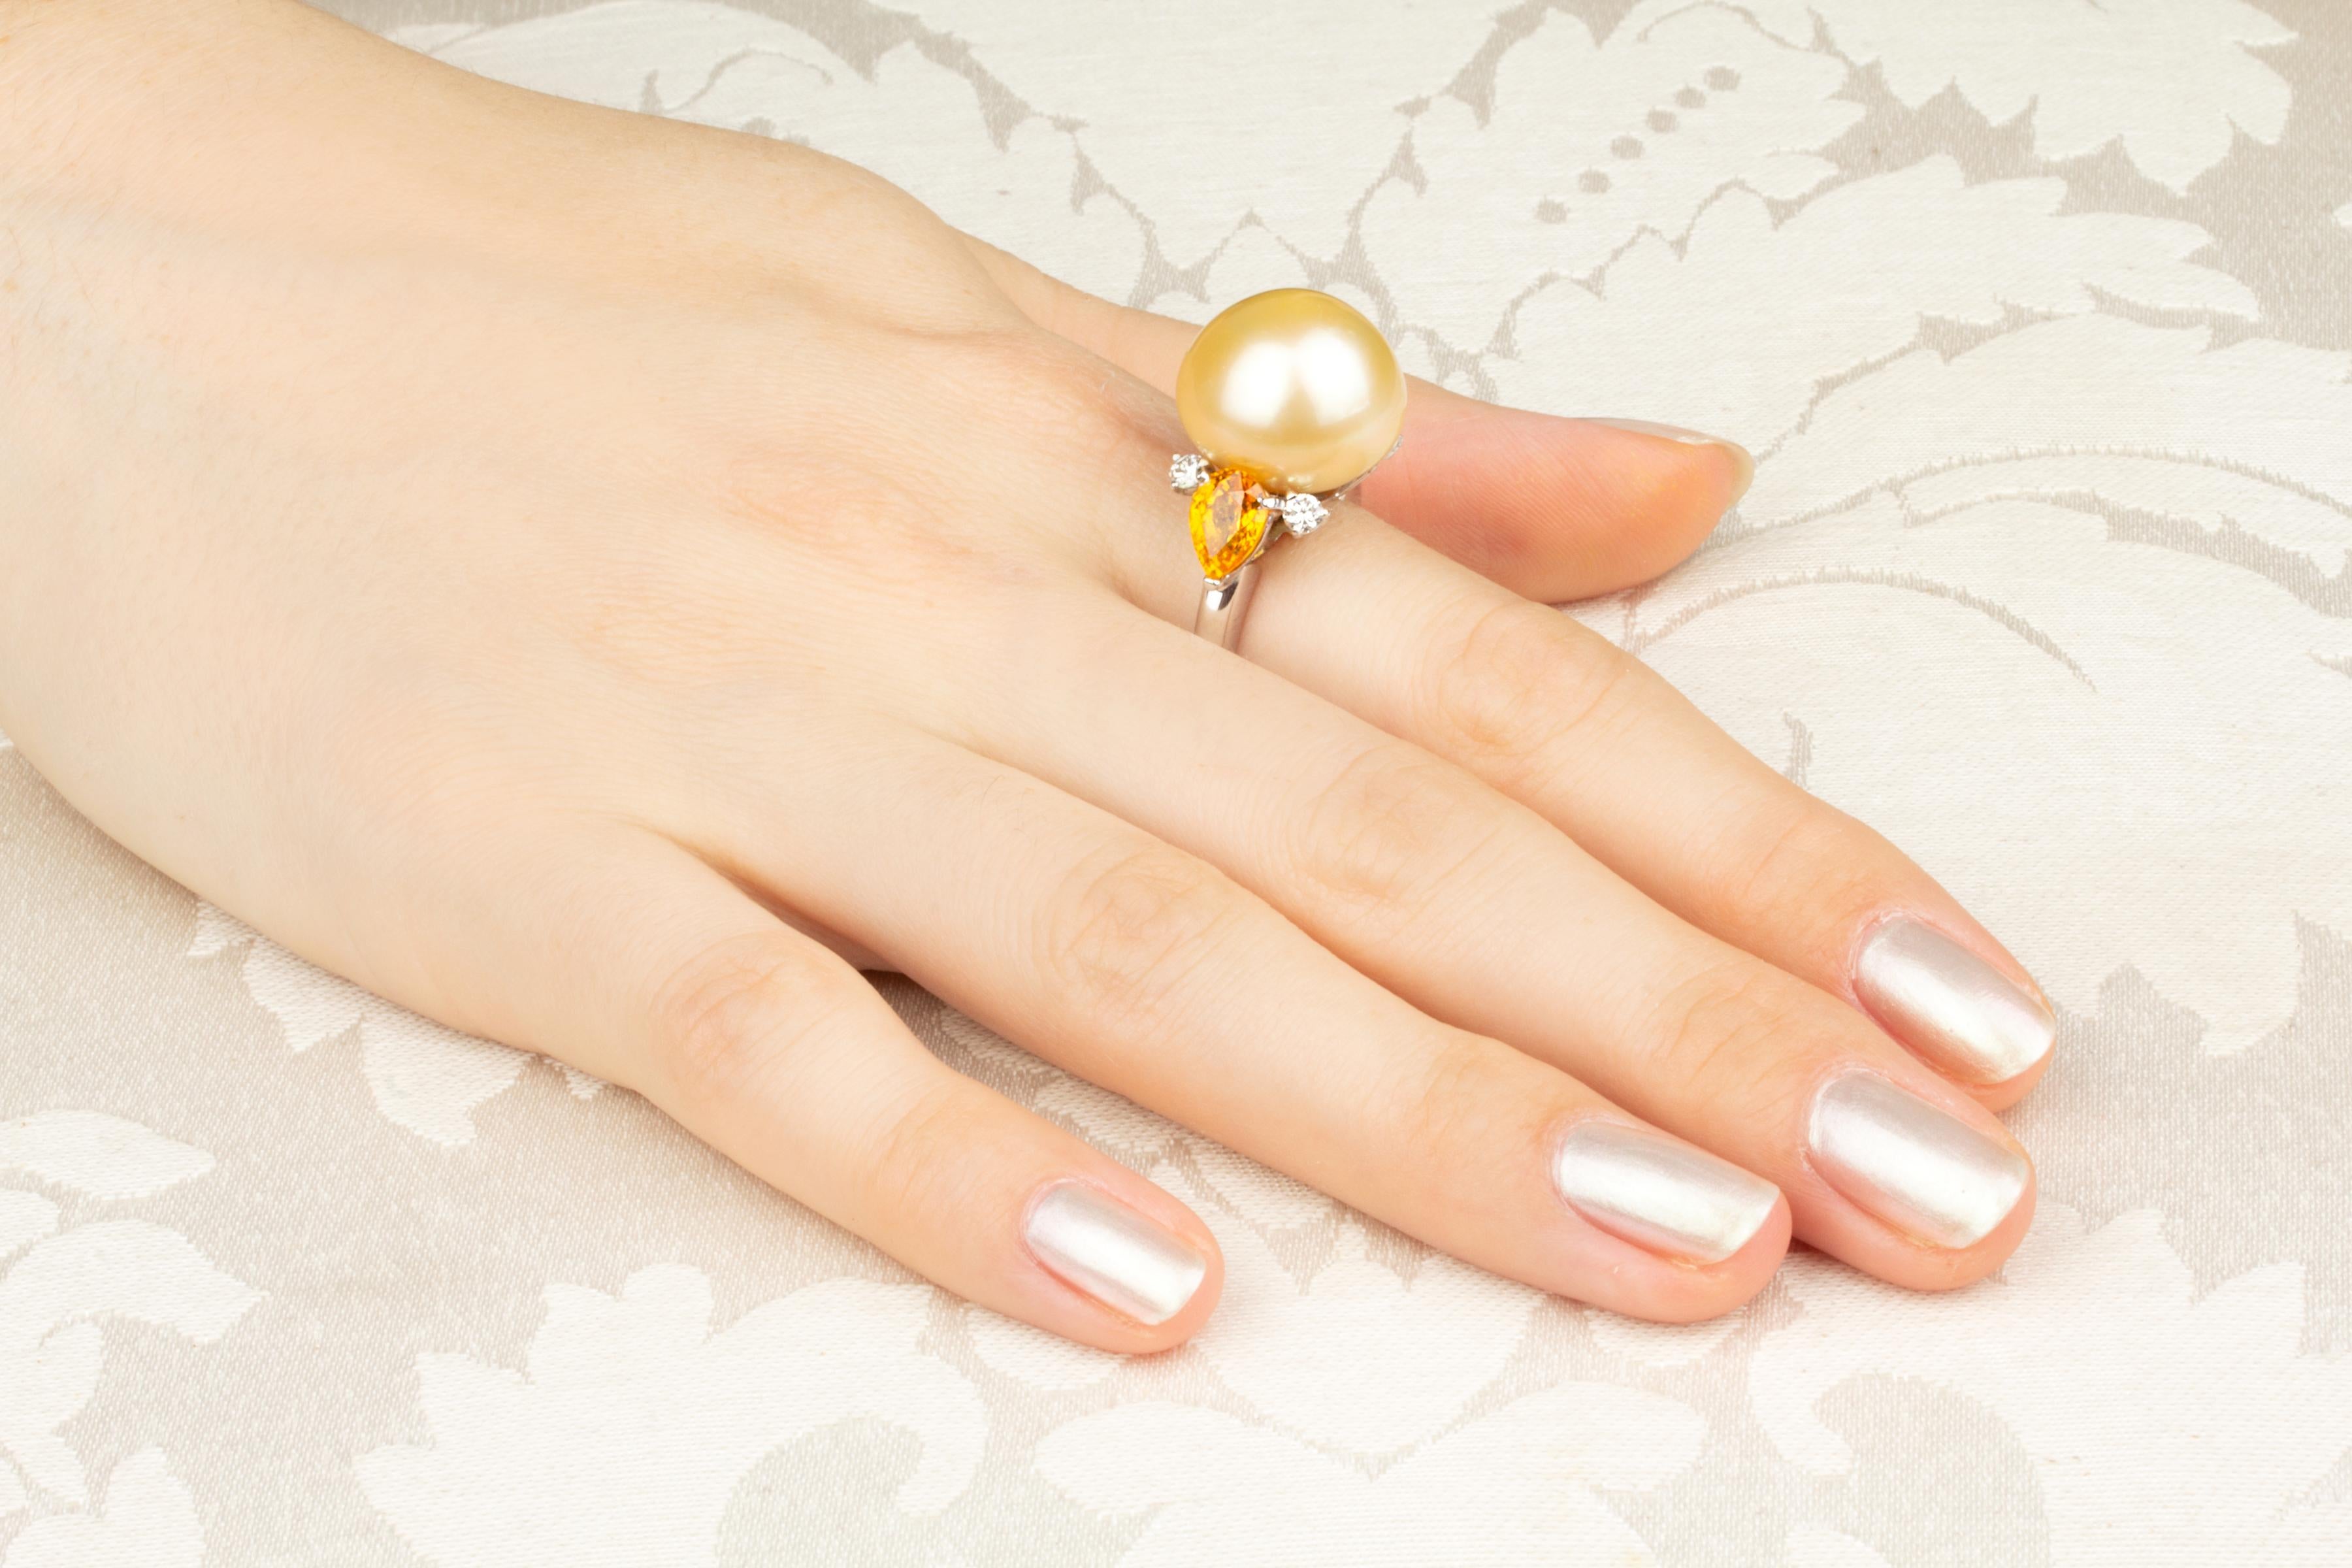 This golden pearl and diamond cocktail ring features a large Australian pearl of 16.5mm diameter. The pearl is untreated. Its natural color and luster have not been enhanced in any way. The pearl is flanked by two pear-shape faceted yellow sapphires